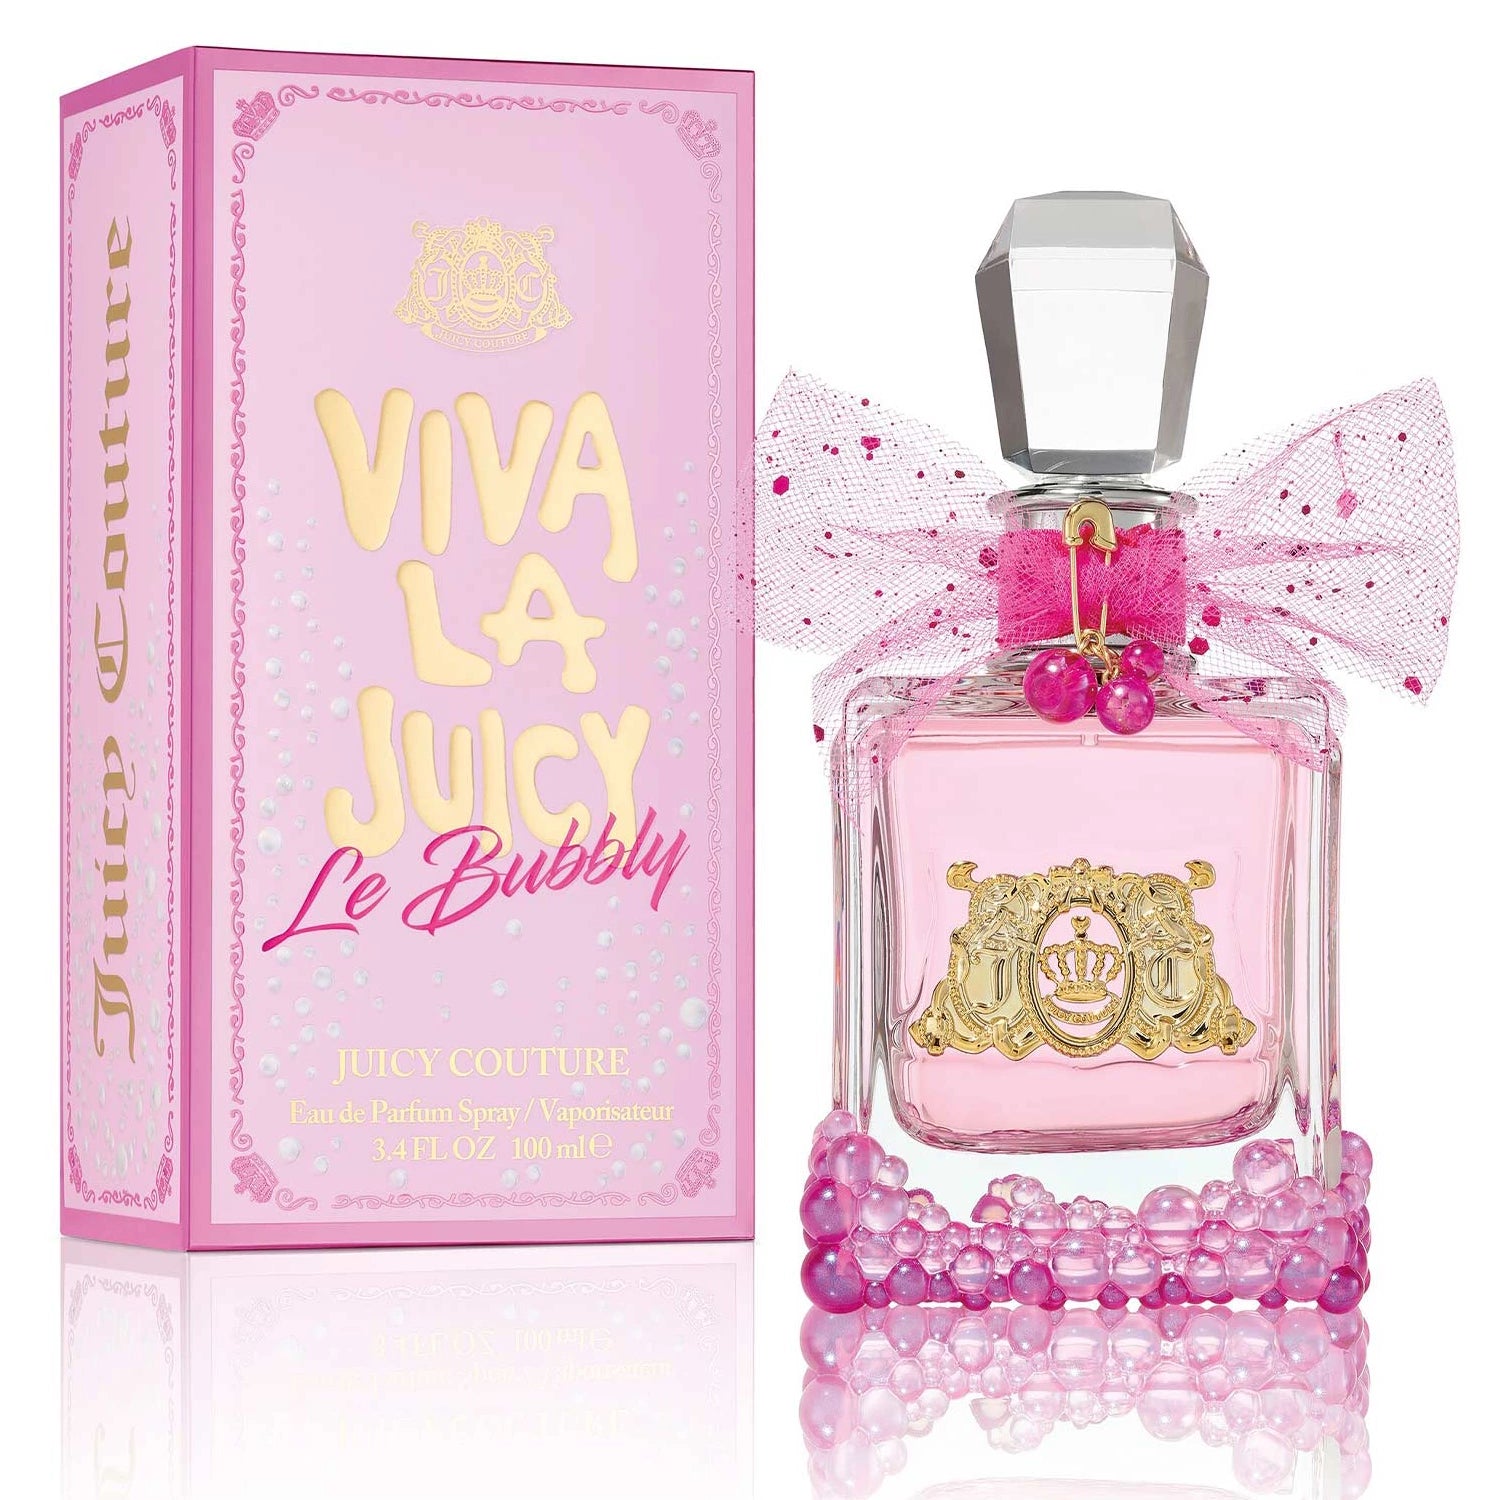 <span data-mce-fragment="1">Make every night in a night to remember. New limited edition Viva La Juicy Le Bubbly Eau de Parfum makes pink champagne wishes and glam dreams come true, all with a POP of pinkatude. Your party for one has just begun, as fizzy notes of pink berries and sweet jasmine keep things feeling bubbly. Time to break out the disco ball and pop the corks, there’s no bursting this bubble. This couture is poppin’!</span><br data-mce-fragment="1"><span data-mce-fragment="1">As enticing as the pop of a cork, the fragrance has opening bubbles of effervescent pink berries and blood orange to excite the senses. A floral heart of gardenia, jasmine, and vanilla orchid are wrapped within golden amber, pralines, and creamy woods for an irresistible signature worth celebrating.</span><br data-mce-fragment="1"><br data-mce-fragment="1"><span data-mce-fragment="1">BUBBLY TOP NOTE: Champagne-inspired Pink Berries Accord</span><br data-mce-fragment="1"><span data-mce-fragment="1">SPARKLING MIDDLE NOTE: Popping Gardenia</span><br data-mce-fragment="1"><span data-mce-fragment="1">CHARMING BASE NOTE: Golden Amber</span><br data-mce-fragment="1"><span data-mce-fragment="1">Mood: Effervescent. Cheery. Addictive.</span>